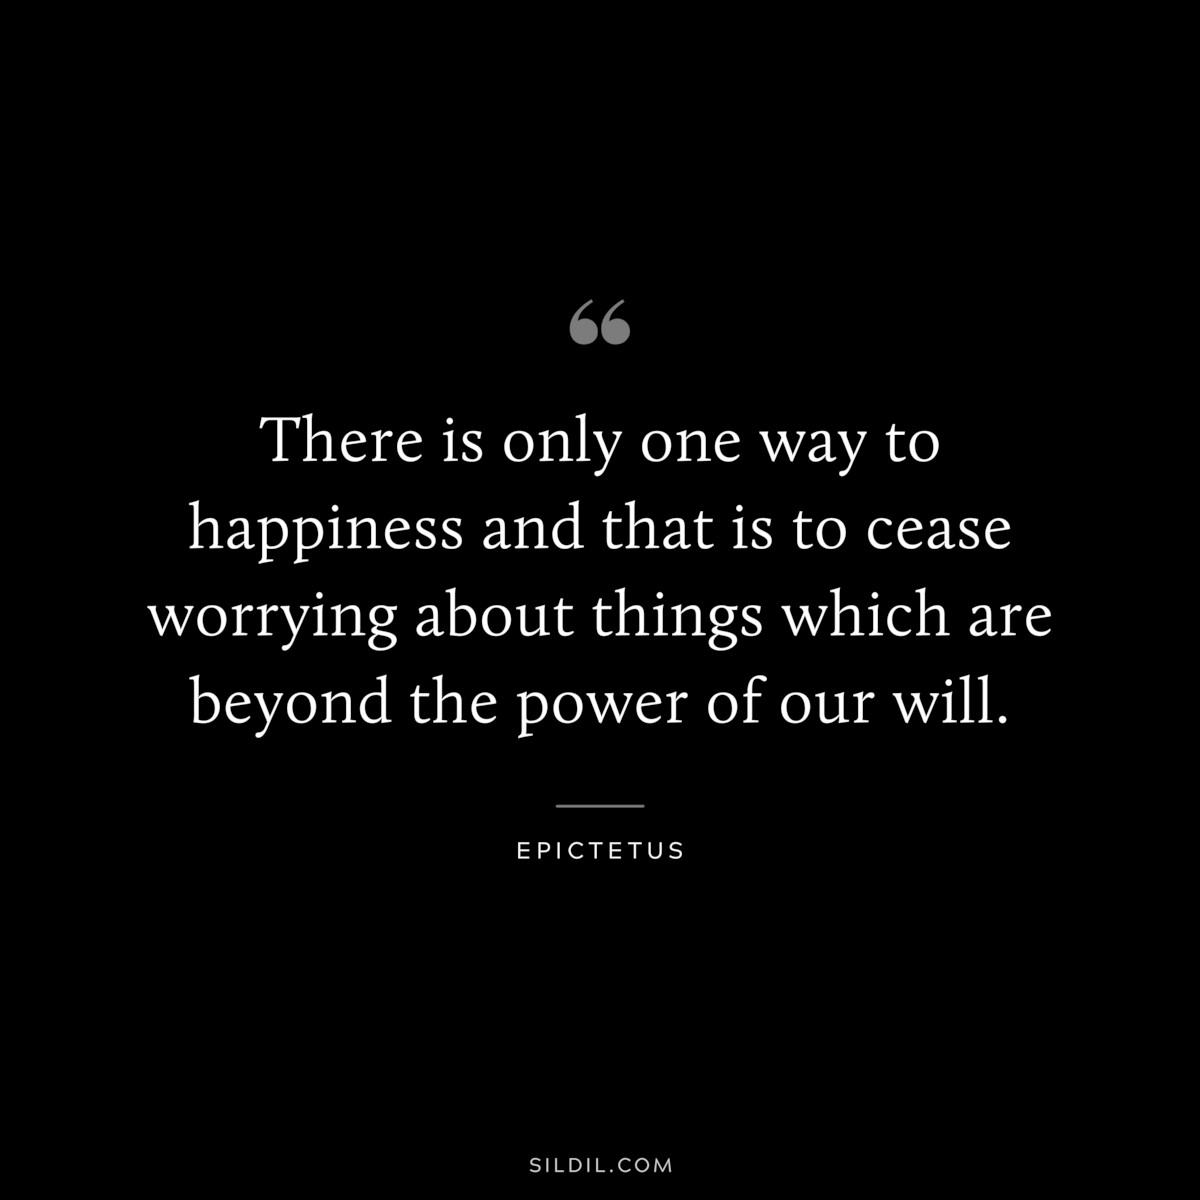 There is only one way to happiness and that is to cease worrying about things which are beyond the power of our will. ― Epictetus